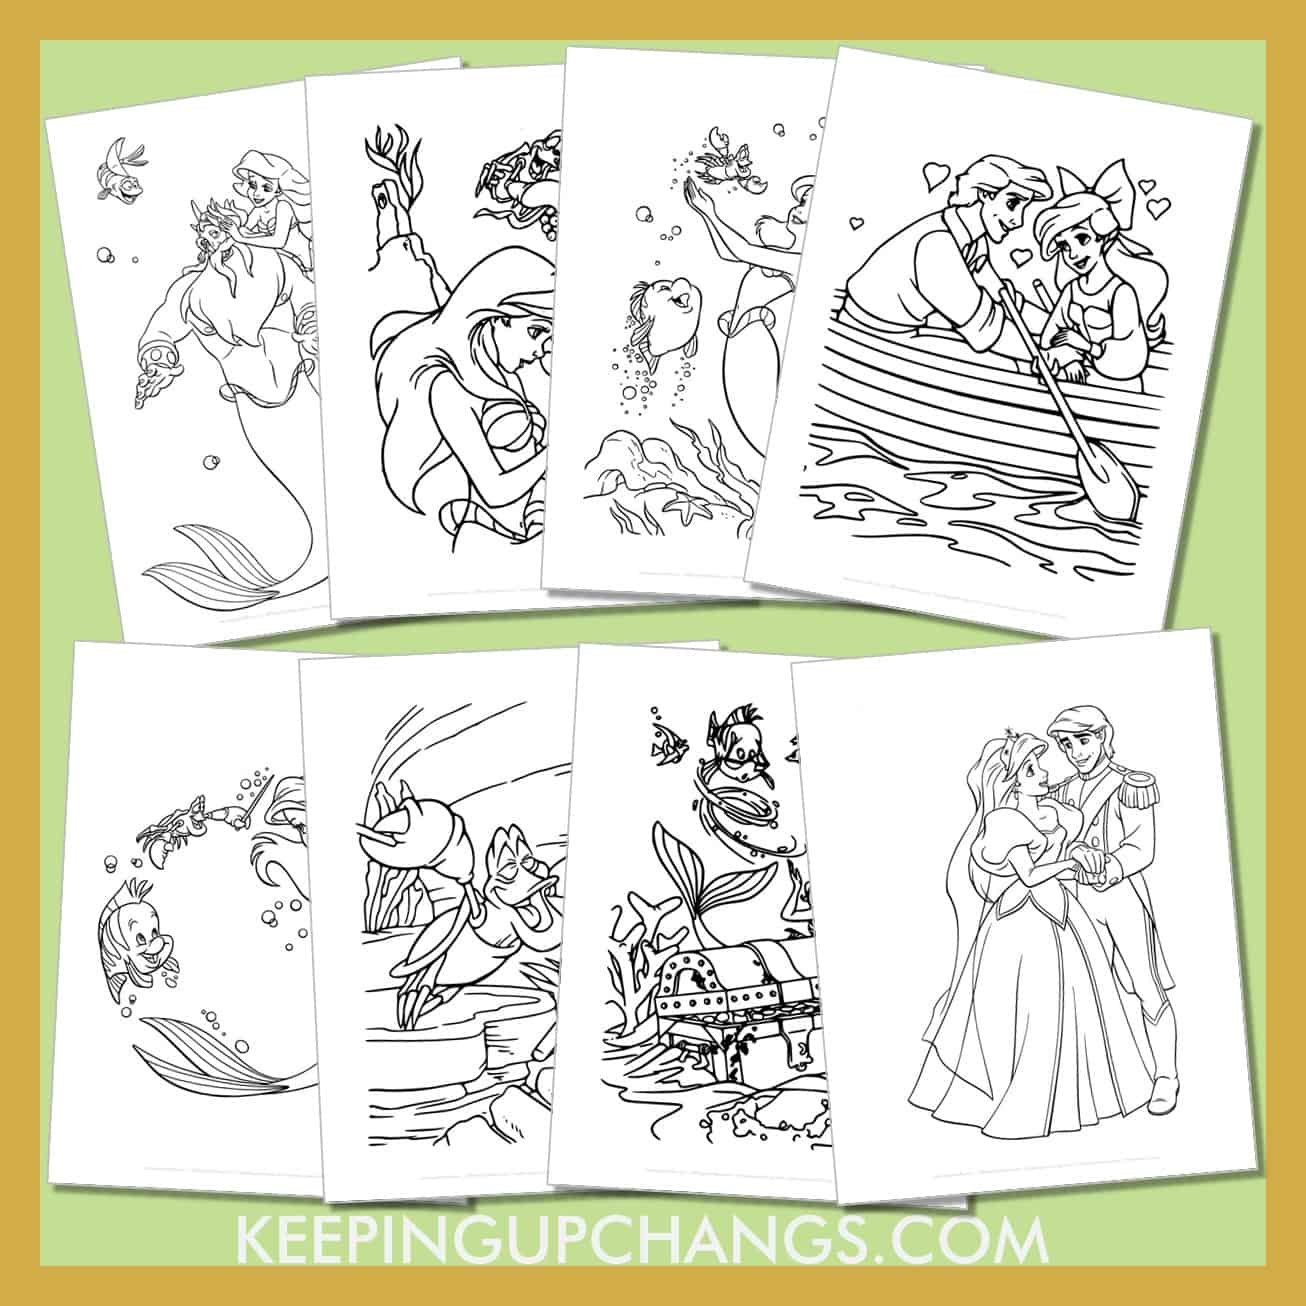 free little mermaid pictures to color for toddlers, kids, adults.